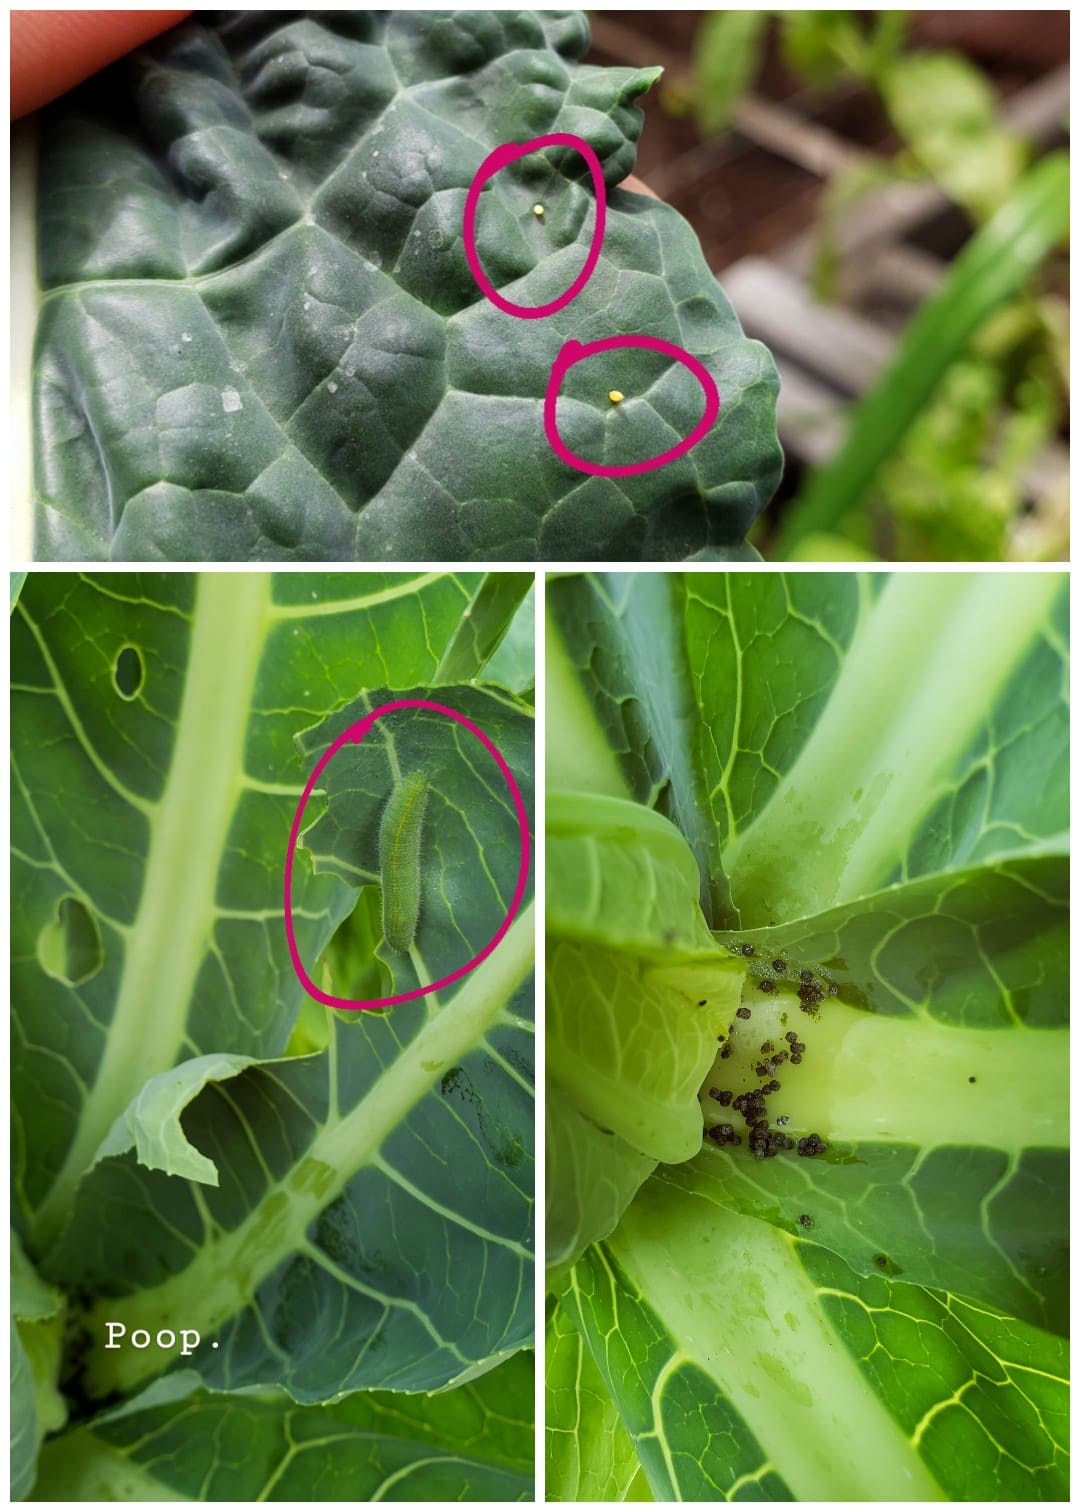 A three way image collage, the first image shows a kale leaf with two cabbage white butterfly eggs on it. They are slightly more yellowish orange, and indication that it will soon hatch. Each egg has been circled purple using a paint app. during editing to highlight the egg. The second image shows the inside of a cauliflower plant, there is a cabbage white caterpillar attached on one of the leaves eating away. It has also been circled purple to highlight the caterpillar and how it camouflages against the plants leaves. The third image shows the inside of a cauliflower plant and the caterpillar poop that has collected in the bottom of it. If you see poop, a caterpillar is usually near.  